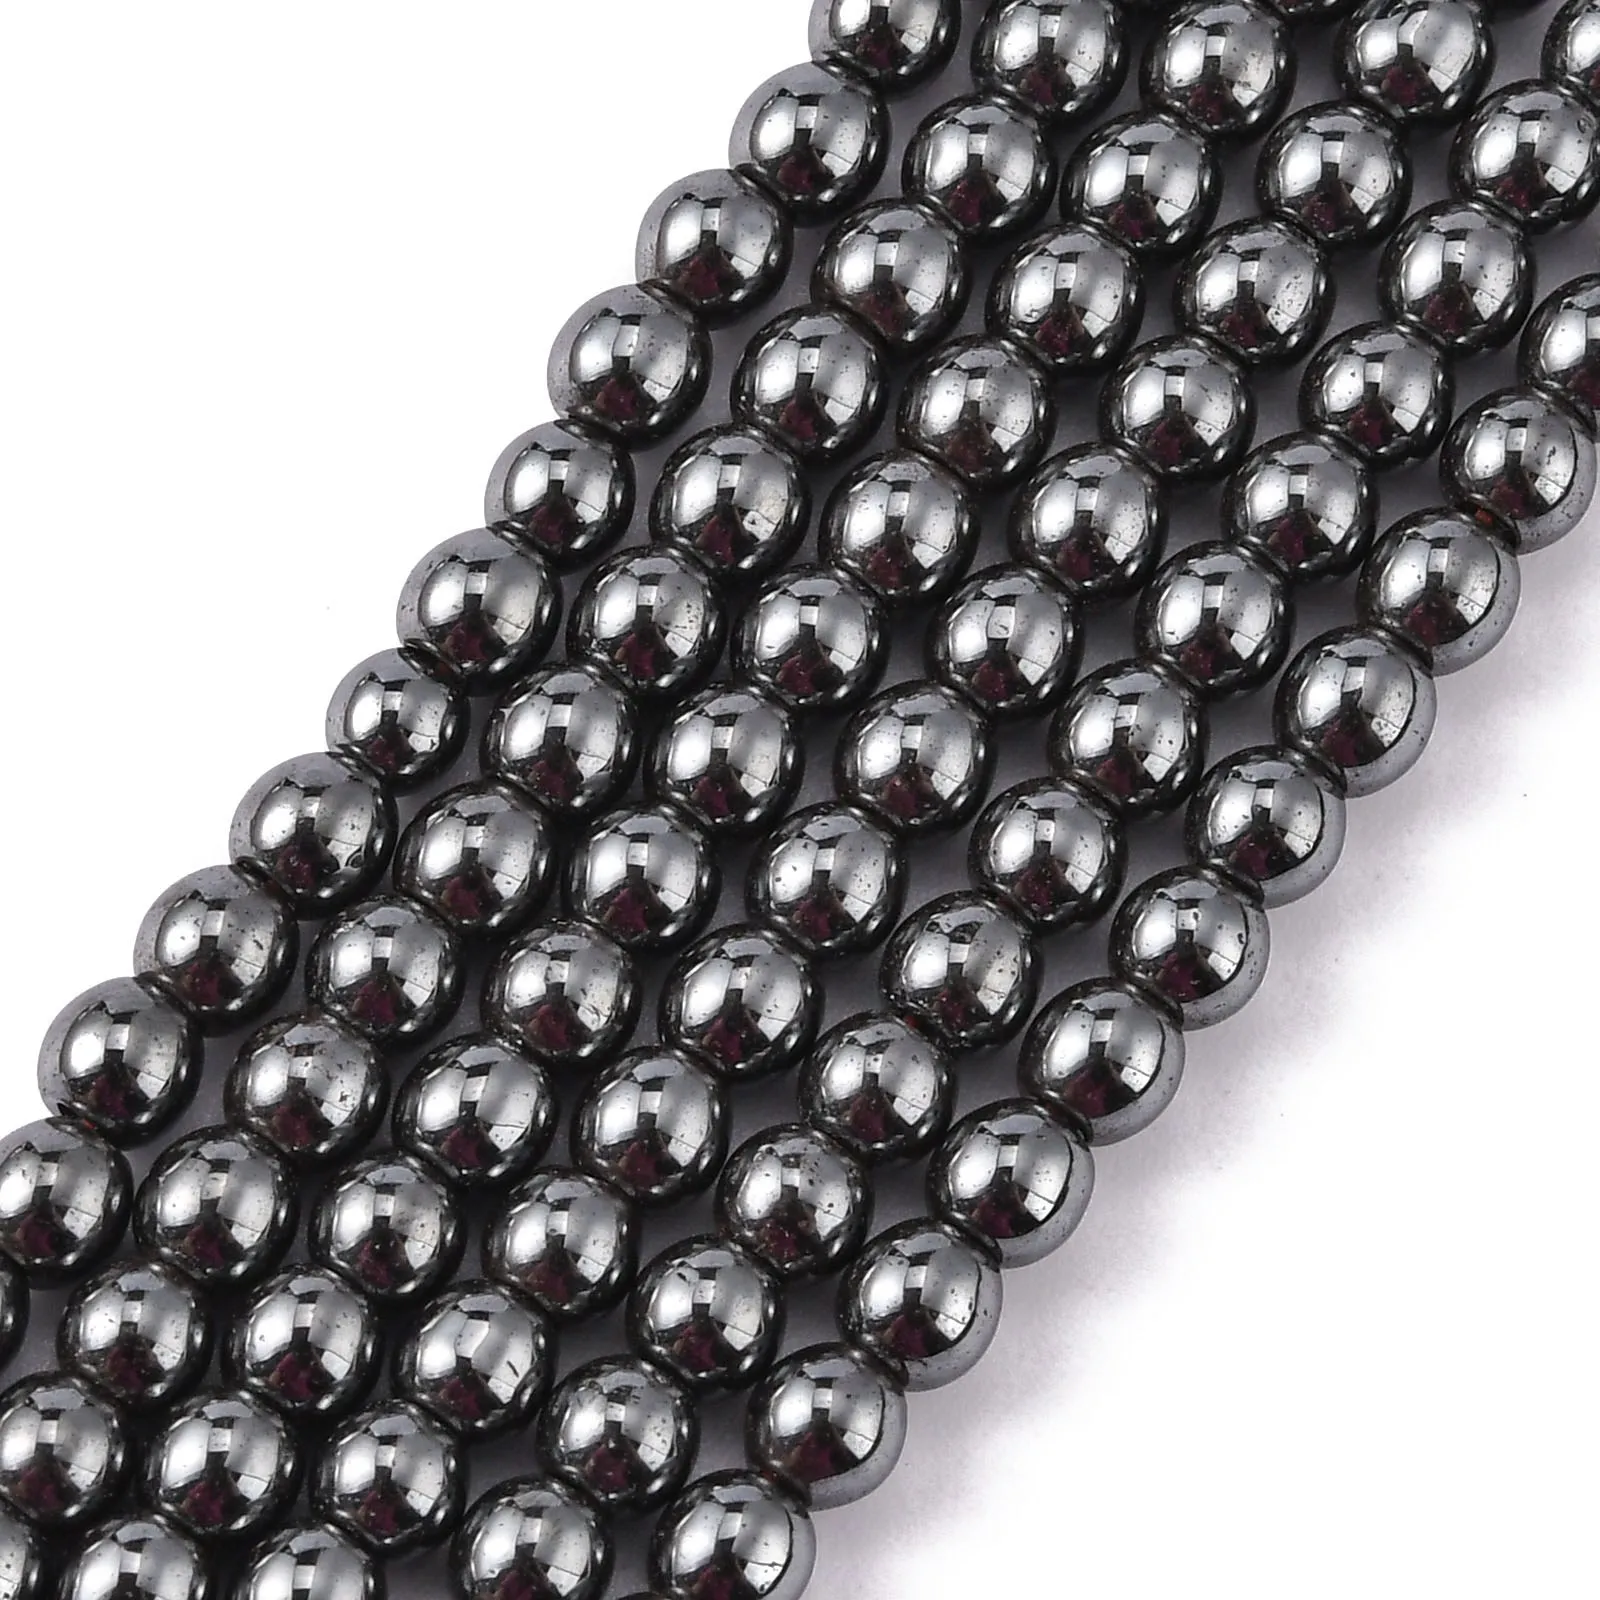 

Black Round Non-Magnetic Synthetic Hematite Beads Stone Strands Spacer Beads for Jewelry Making DIY Bracelet Necklace 4/6/8/10mm